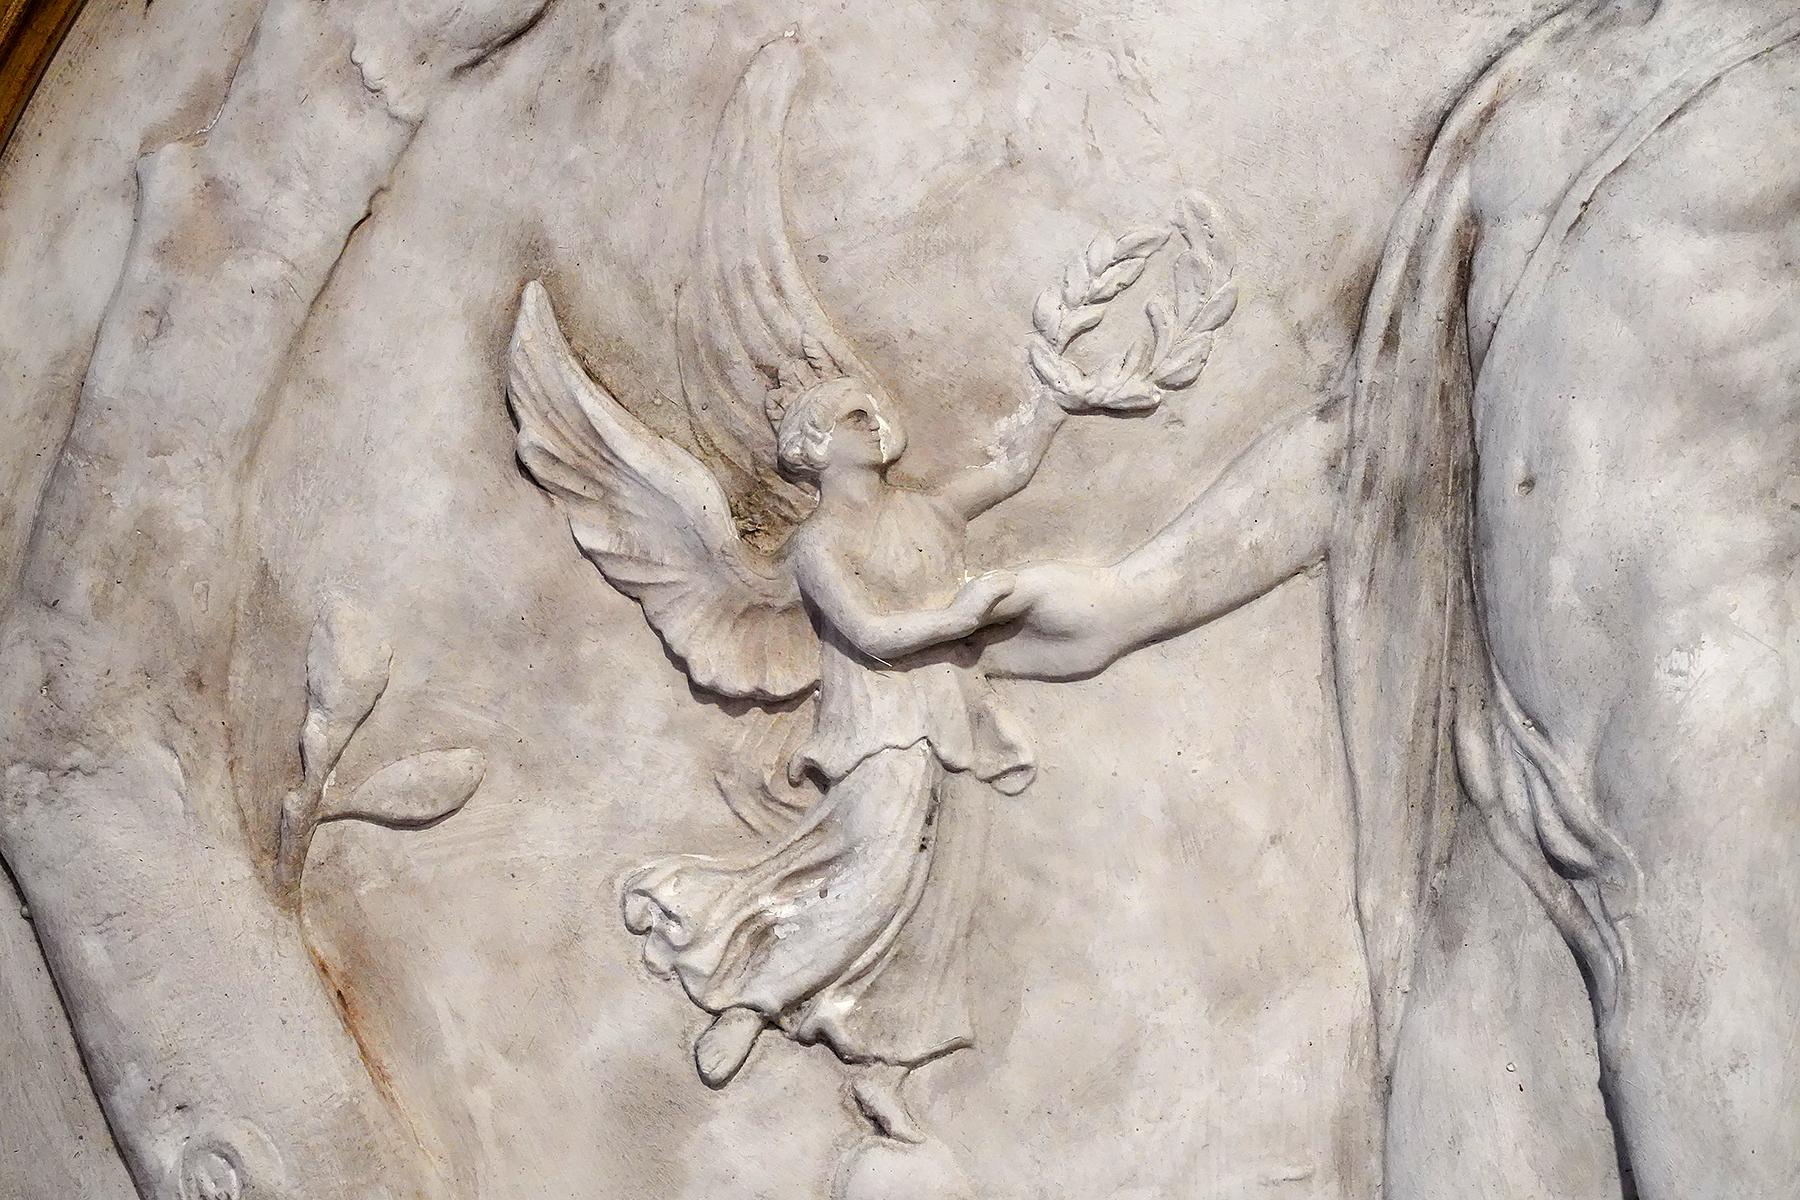 Greco Roman Epic Relief Depicting Classical Hero Receiving Laurel Wreath from an Angel